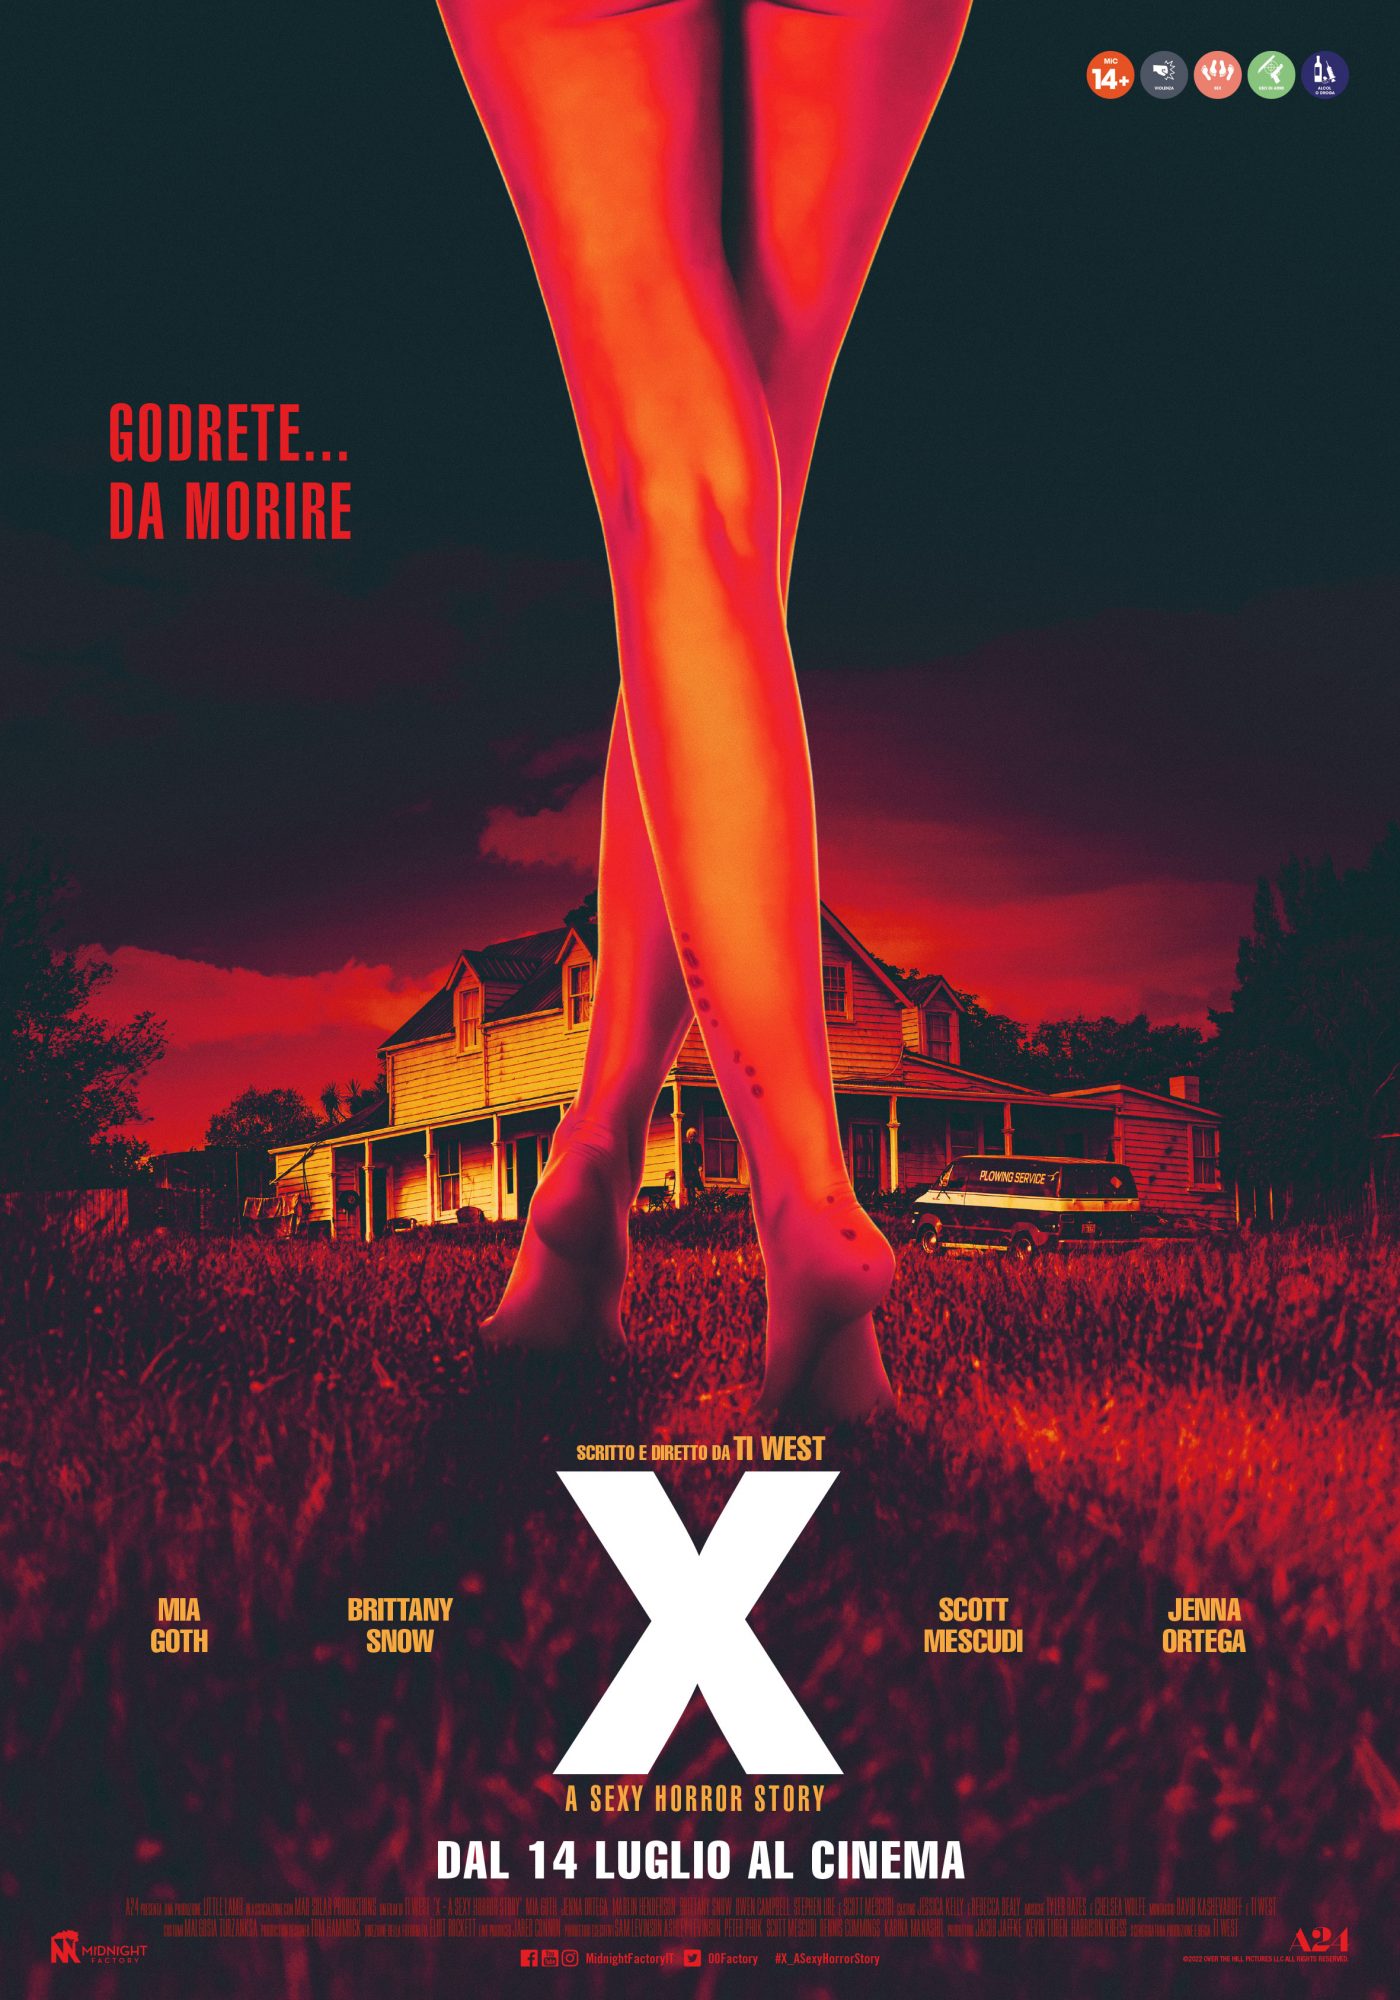 X - A Sexy Horror Story, a clip of Ti West's thrilling horror